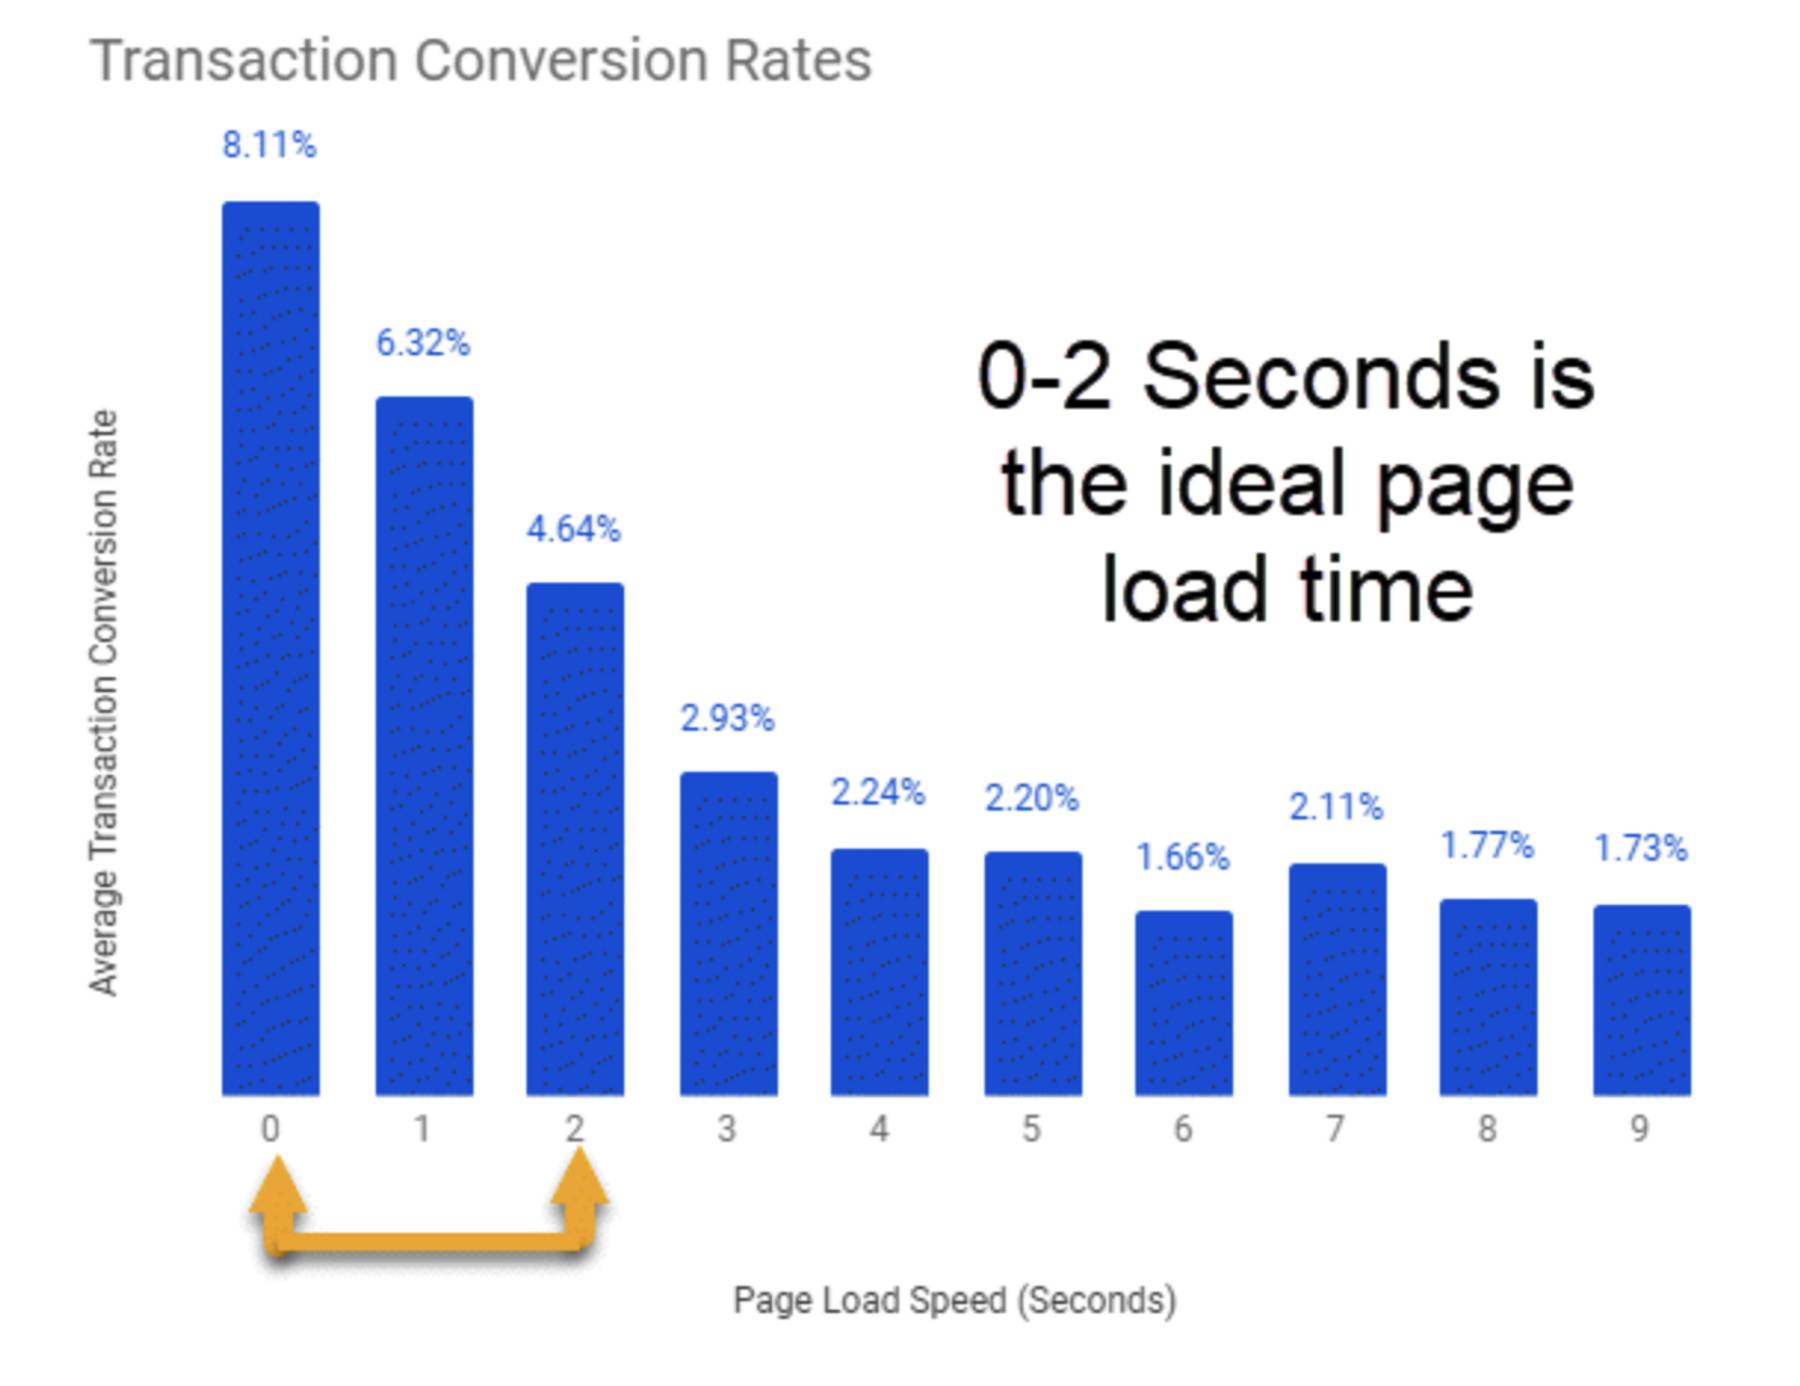 Portent's findings on conversion rates based on page speeds